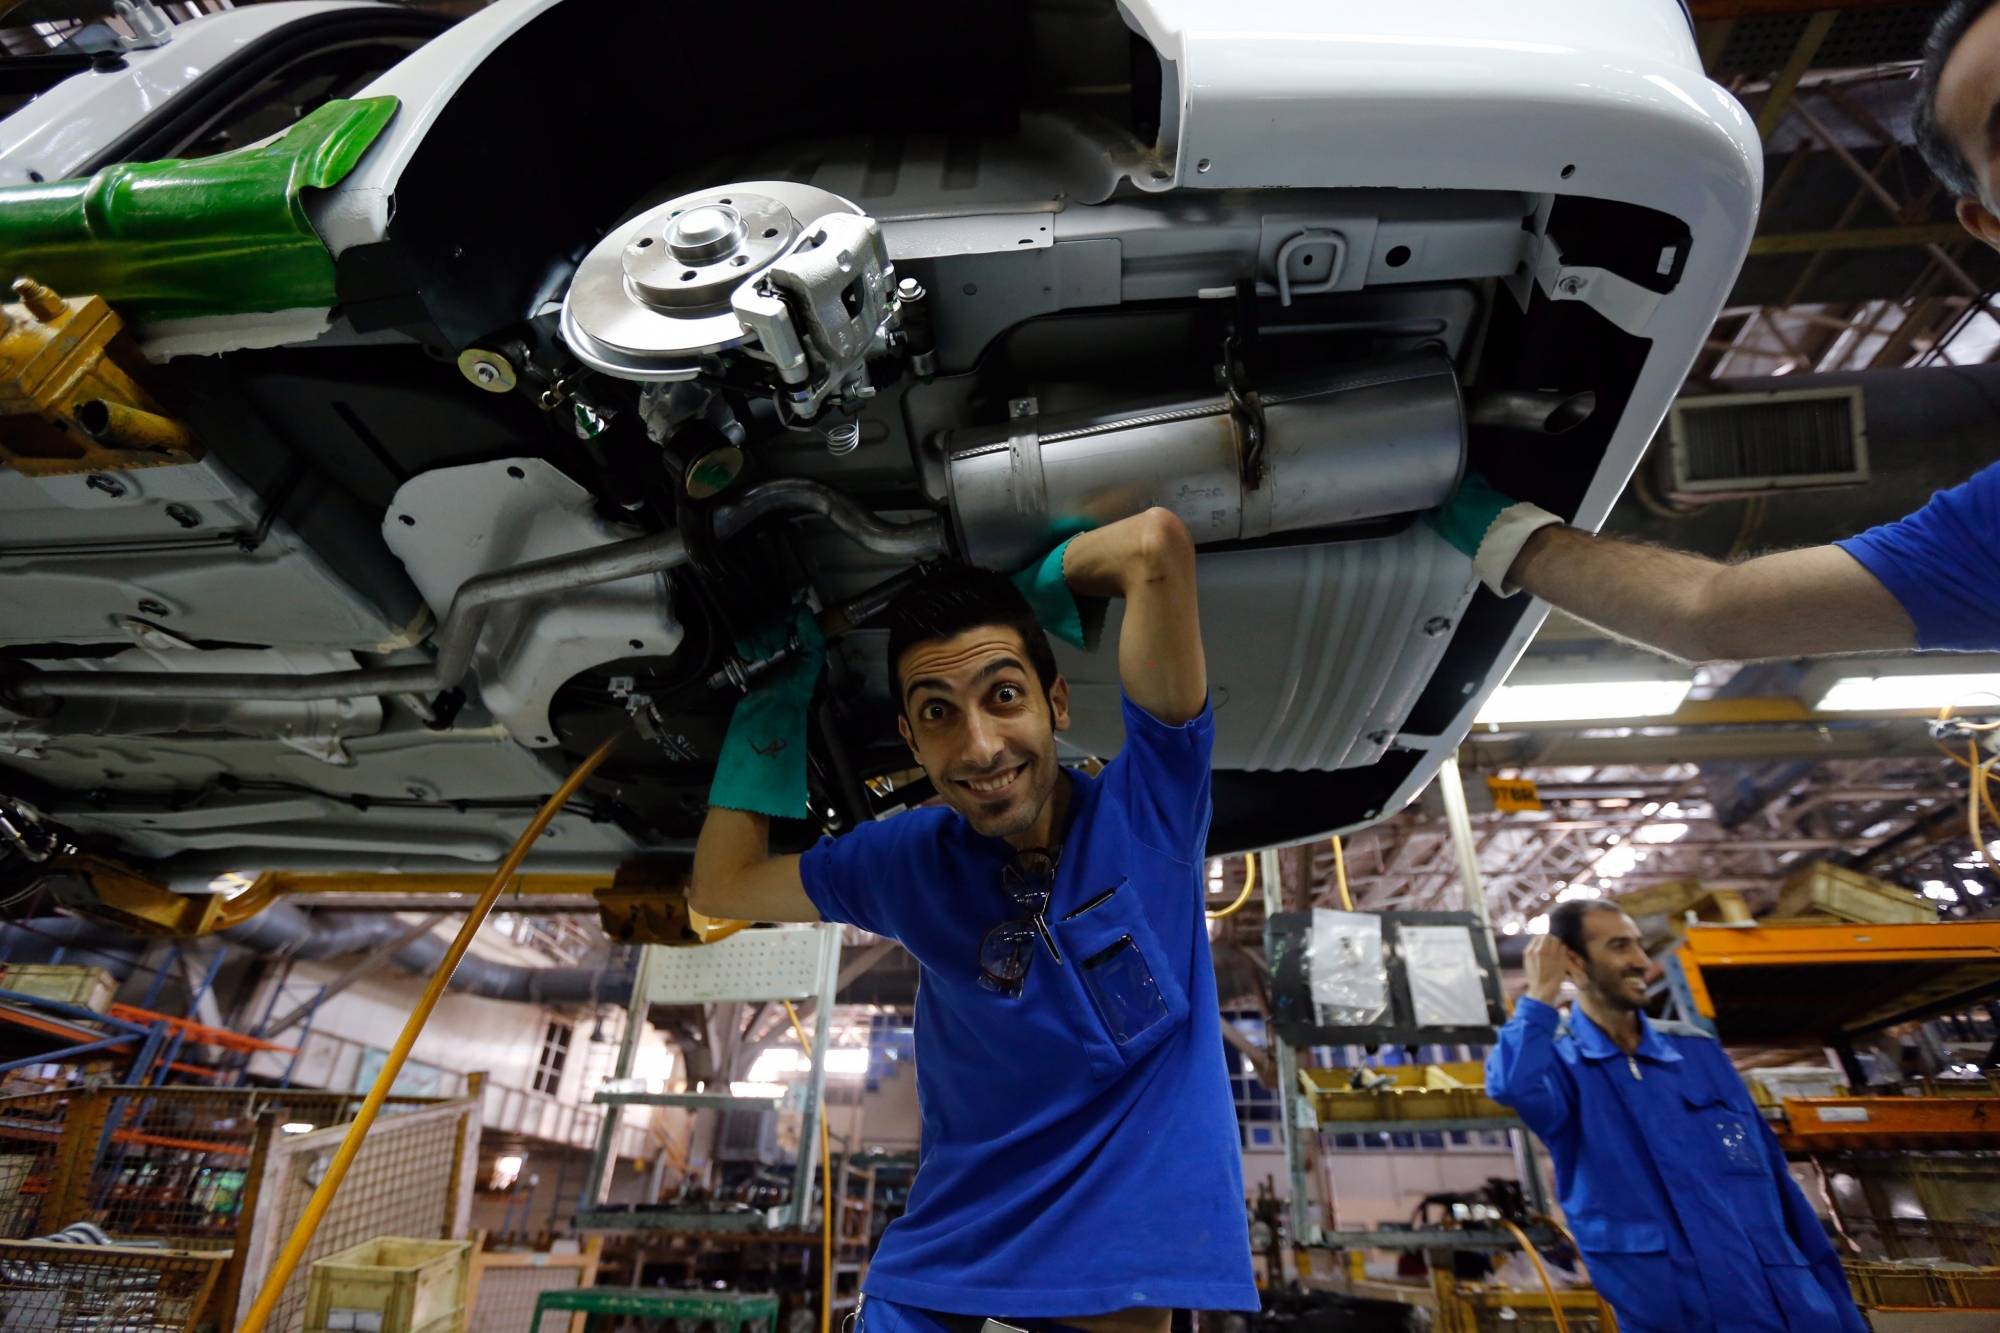 epa04441890 Iranian workers work at the Iranian automobile manufacturing company Iran-Khodro, in Tehran, Iran, 11 October 2014. Iran-Khodro is the leading Iranian vehicle manufacturer that mainly assembles the Iranian brand Samand as well as the French Peugueot for both local market and exports to neighboring countries. The companyÄôs turnover contributes with a major part of the country's non-oil revenue. Despite the international sanctions imposed on Iran due to the country's controversial nuclear program, Iran-Khodro is trying to produce all necessary spare parts by itself.  EPA/ABEDIN TAHERKENAREH IRAN INDUSTRIE AUTO KHODRO